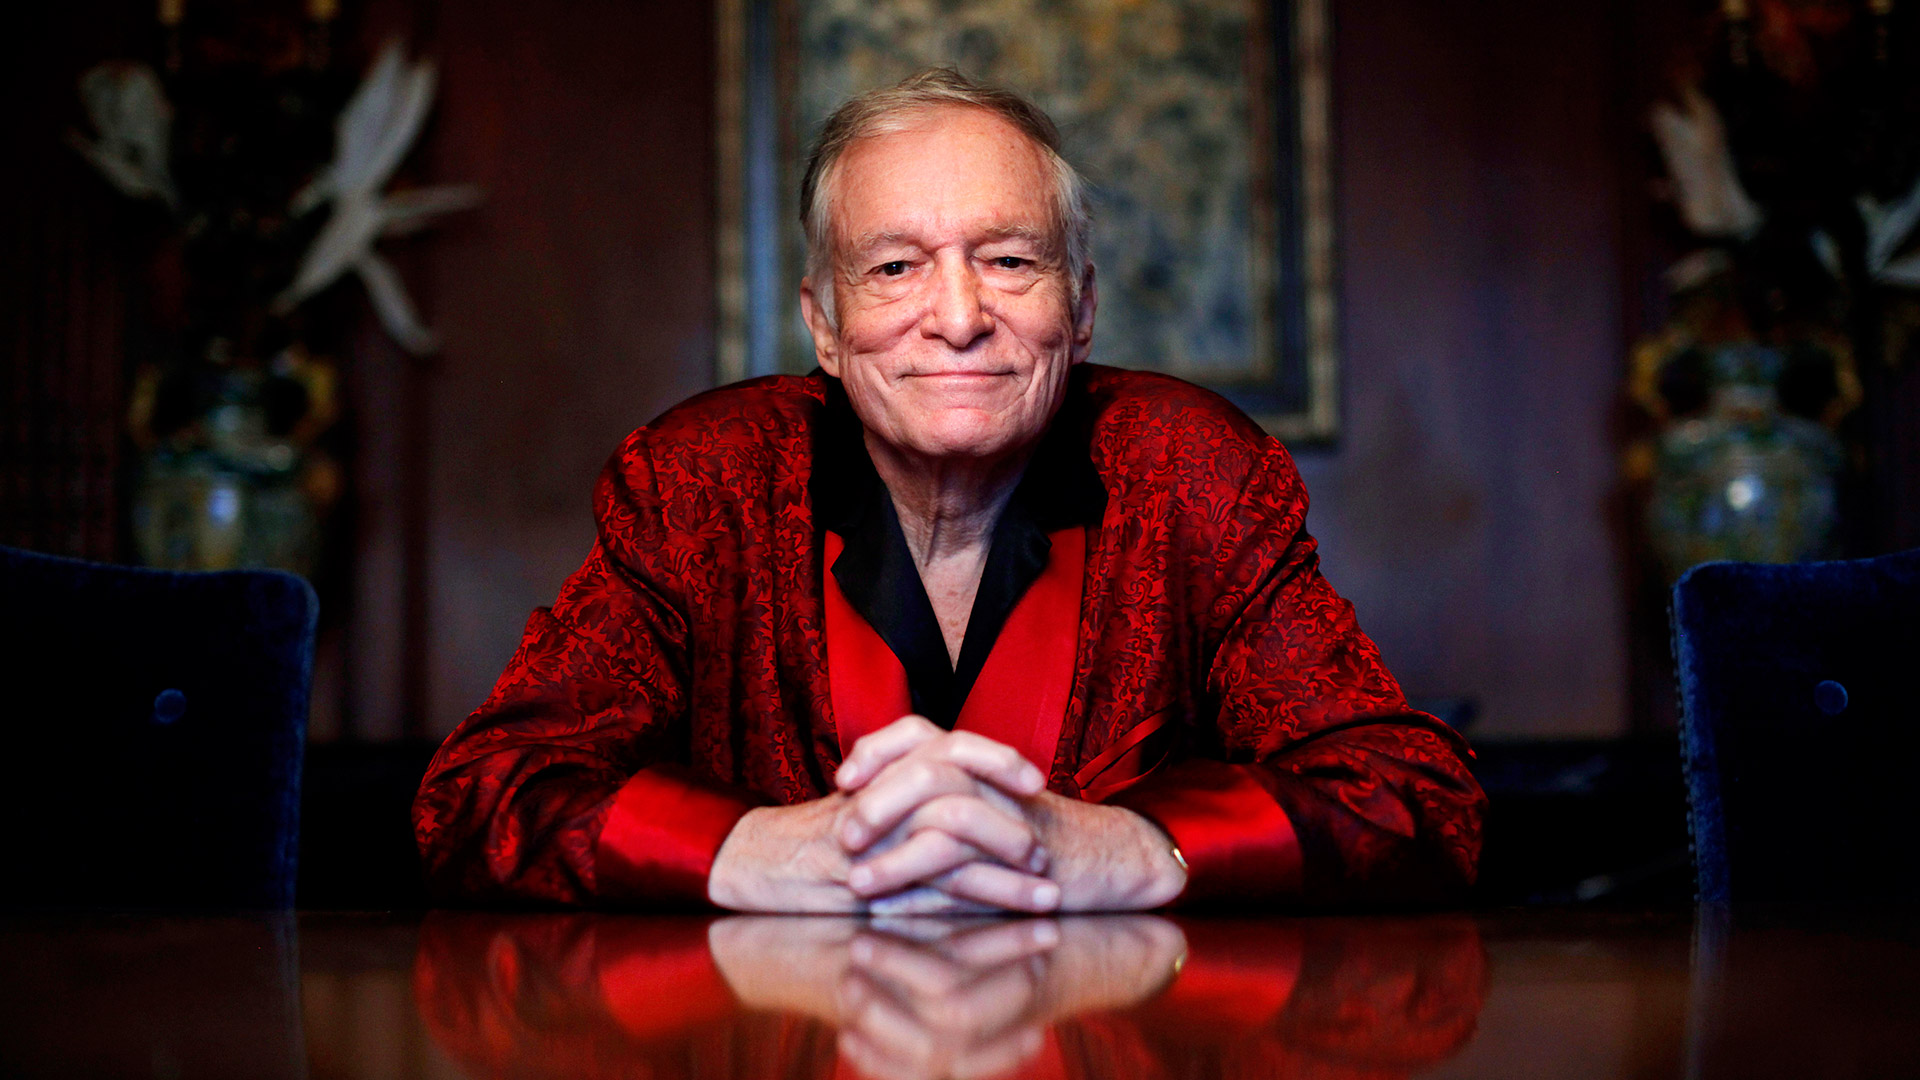 Hugh contrajo matrimonio en tres ocasiones. FILE - In this Nov. 4, 2010, file photo, Playboy magazine founder Hugh Hefner poses for photos at the Playboy Mansion in Los Angeles. The Playboy Mansion is up for sale but longtime resident Hefner wants to stay put. Playboy Enterprise announced the West Los Angeles estate, the backdrop of many film shoots and wild parties, was listed on Monday, Jan. 11, 2016, for $200 million. (AP Photo/Jae C. Hong, File)